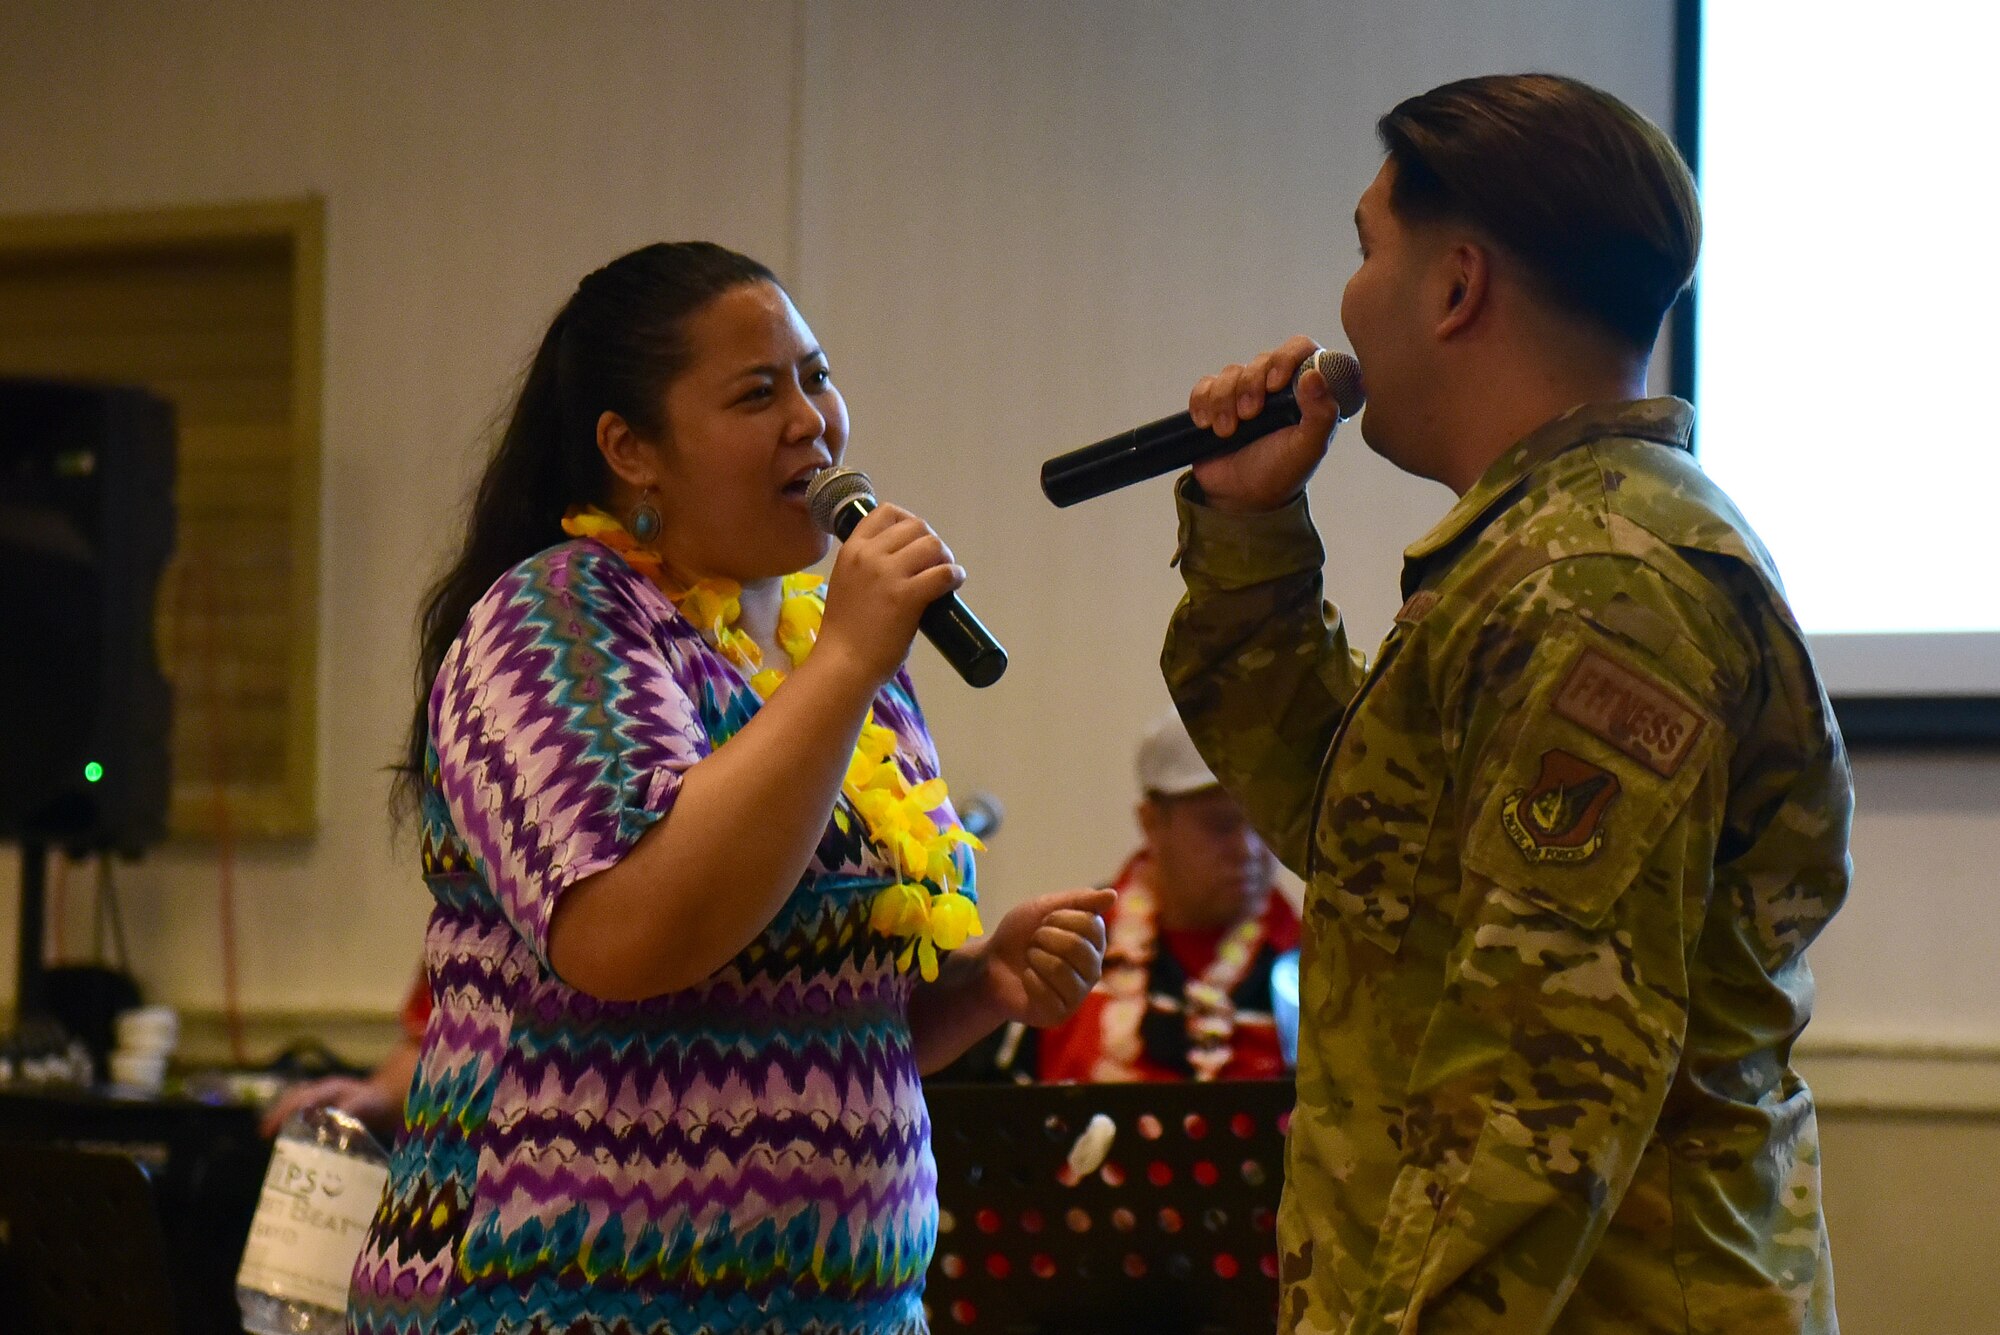 Ricah Quinto, 8th Force Support Squadron community programs specialist, and Staff Sgt. Karl Pasqual, 8th FSS sports director, sing a song during the Asian American and Pacific Islander Heritage Month bash party at Kunsan Air Base, Republic of Korea, May 20, 2021. The bash party was the final event to close out AAPI month which included AAPI cuisine, cultural performances, and guest speakers. (U.S. Air Force photo by Senior Airman Suzie Plotnikov)